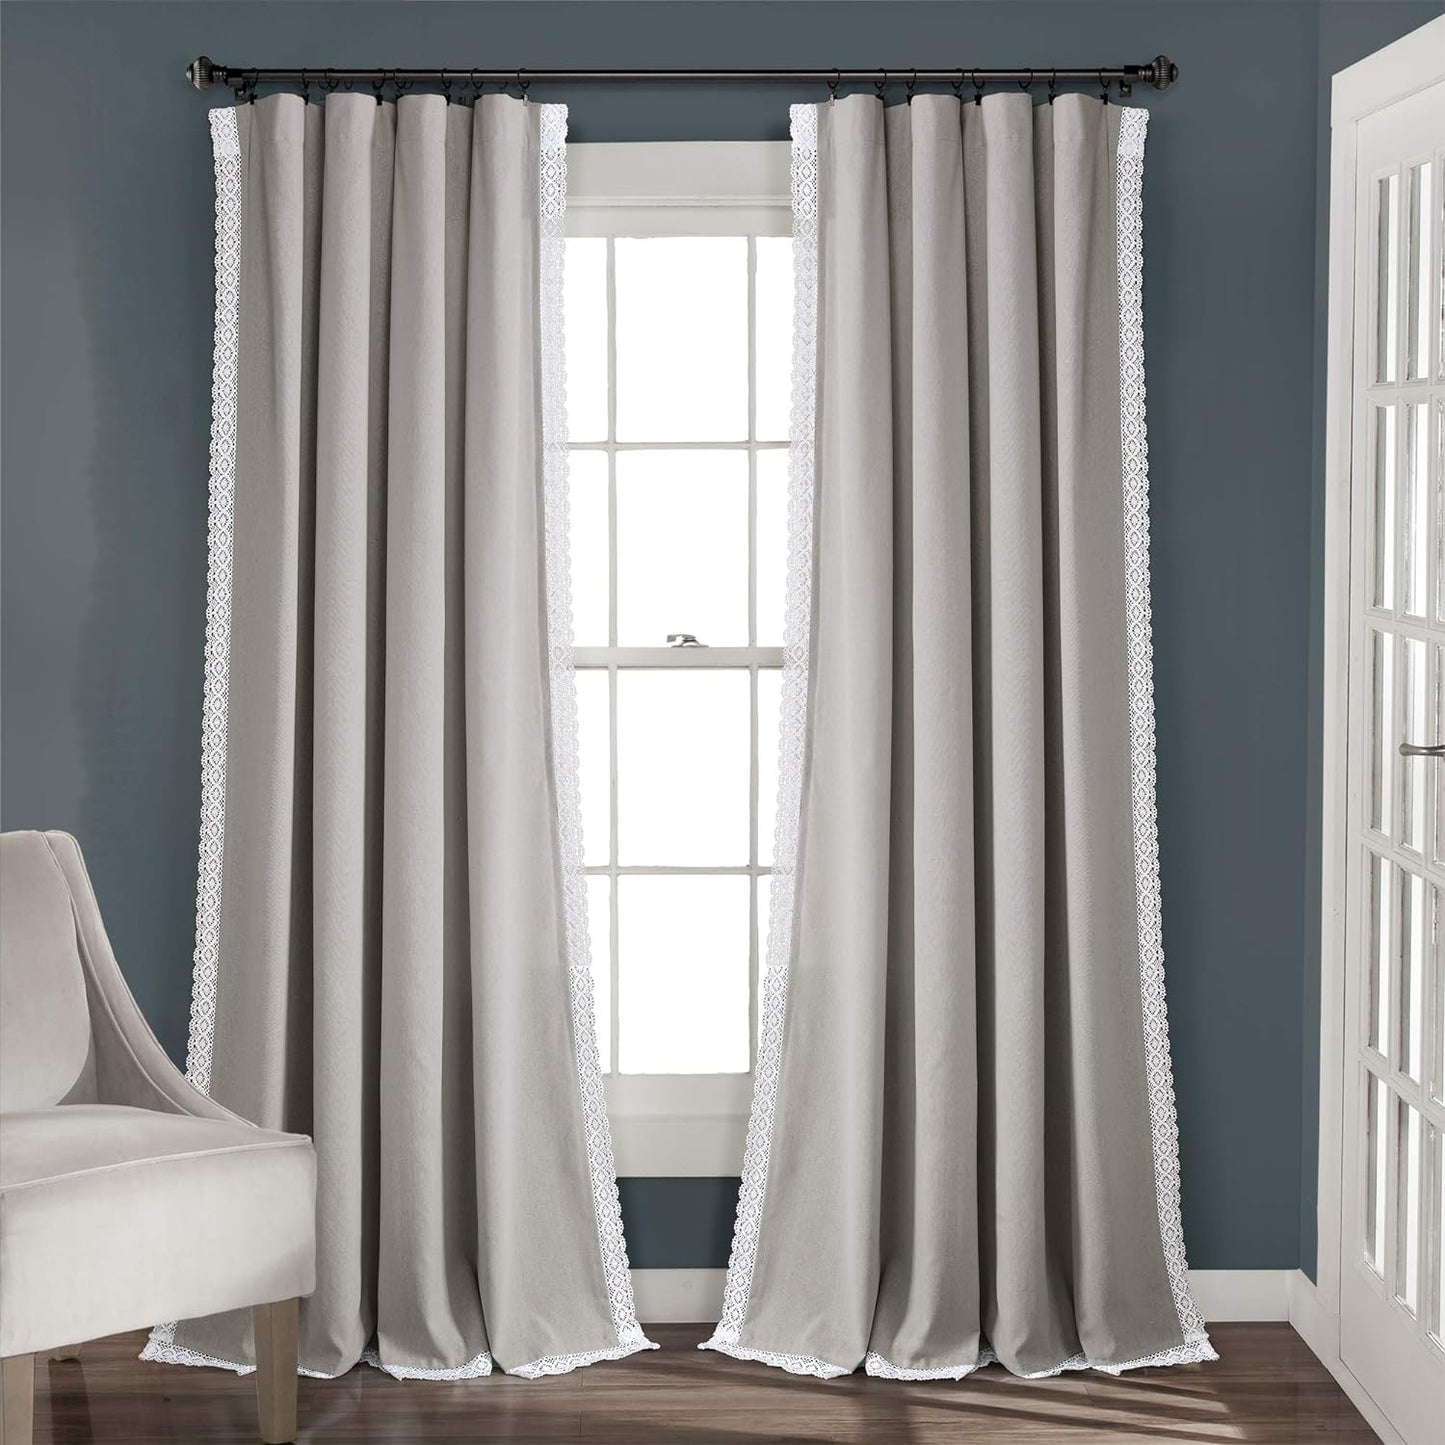 Lush Decor Rosalie Light Filtering Window Curtain Panel Set- Pair- Vintage Farmhouse & French Country Style Curtains - Timeless Dreamy Drape - Romantic Lace Trim - 54" W X 84" L, White  Triangle Home Fashions Light Gray Window Panel 54"W X 108"L